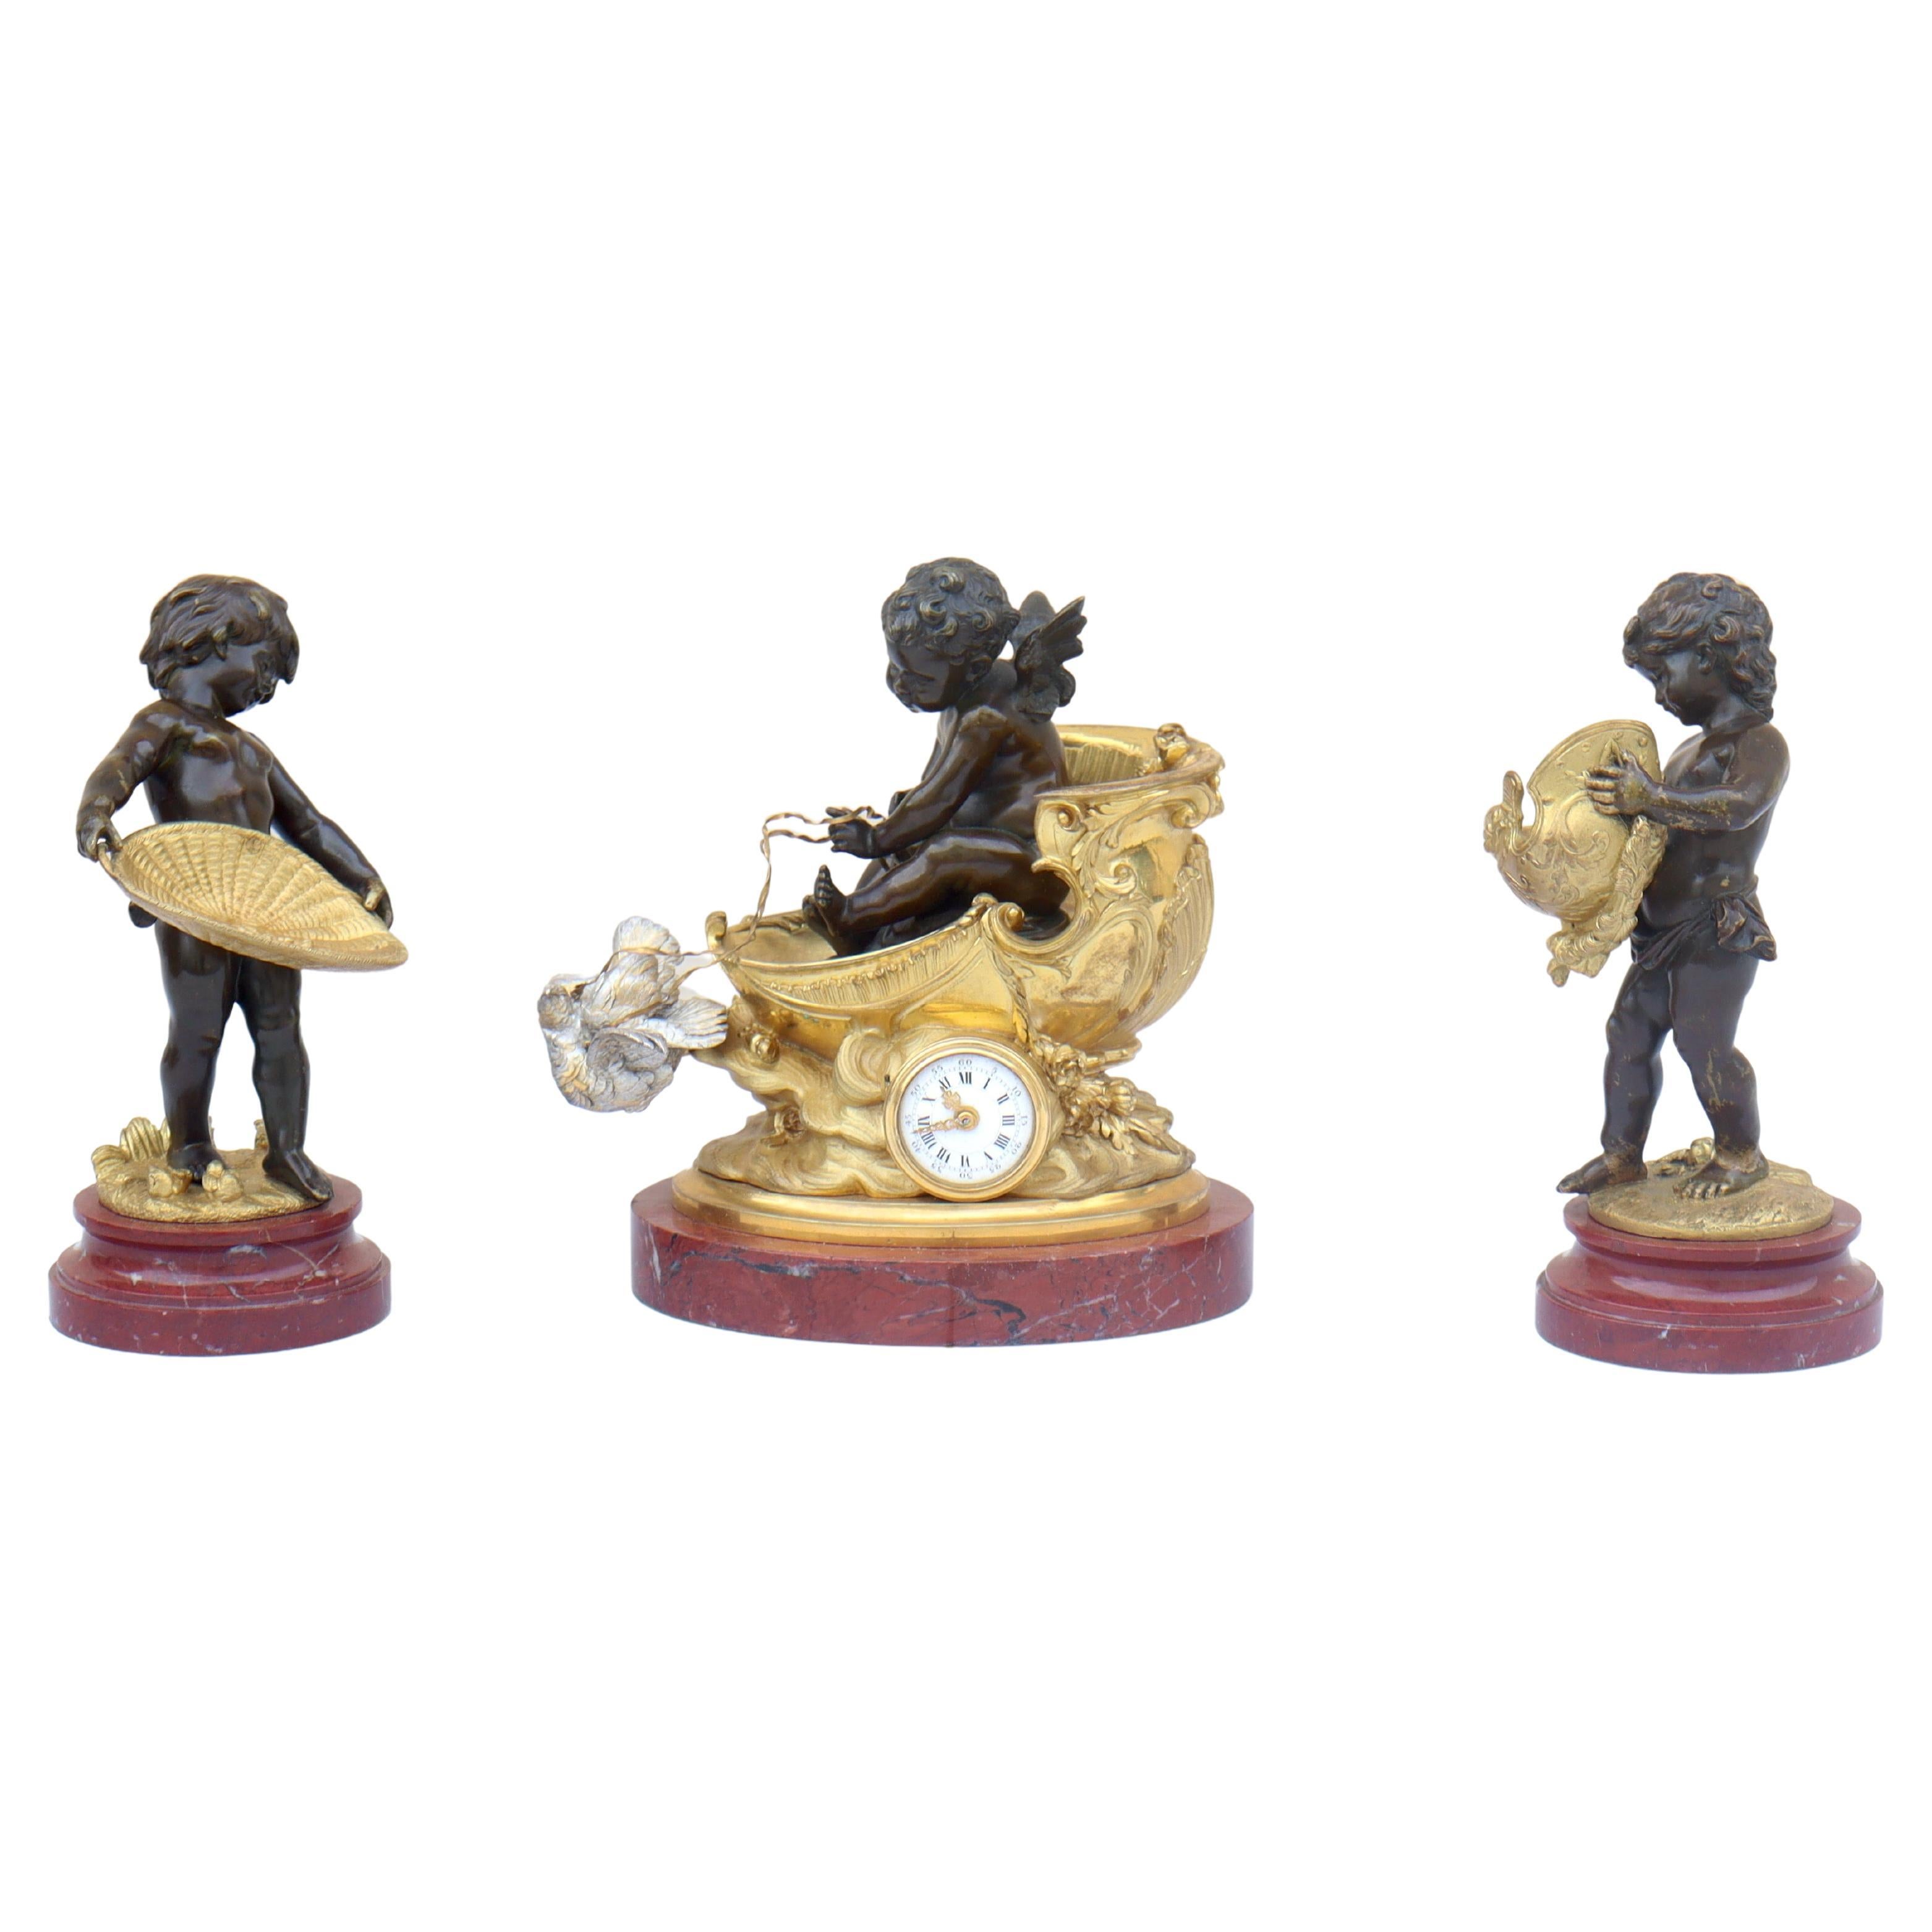 Rare and amazing quality Napoléon III three pieces clock set by Auguste Moreau (1834-1917)
Designed for the clock as the wheel of a chariot set on clouds, pulled by a couple of silvered patina bronze doves and guided by a cupid, and a pair of